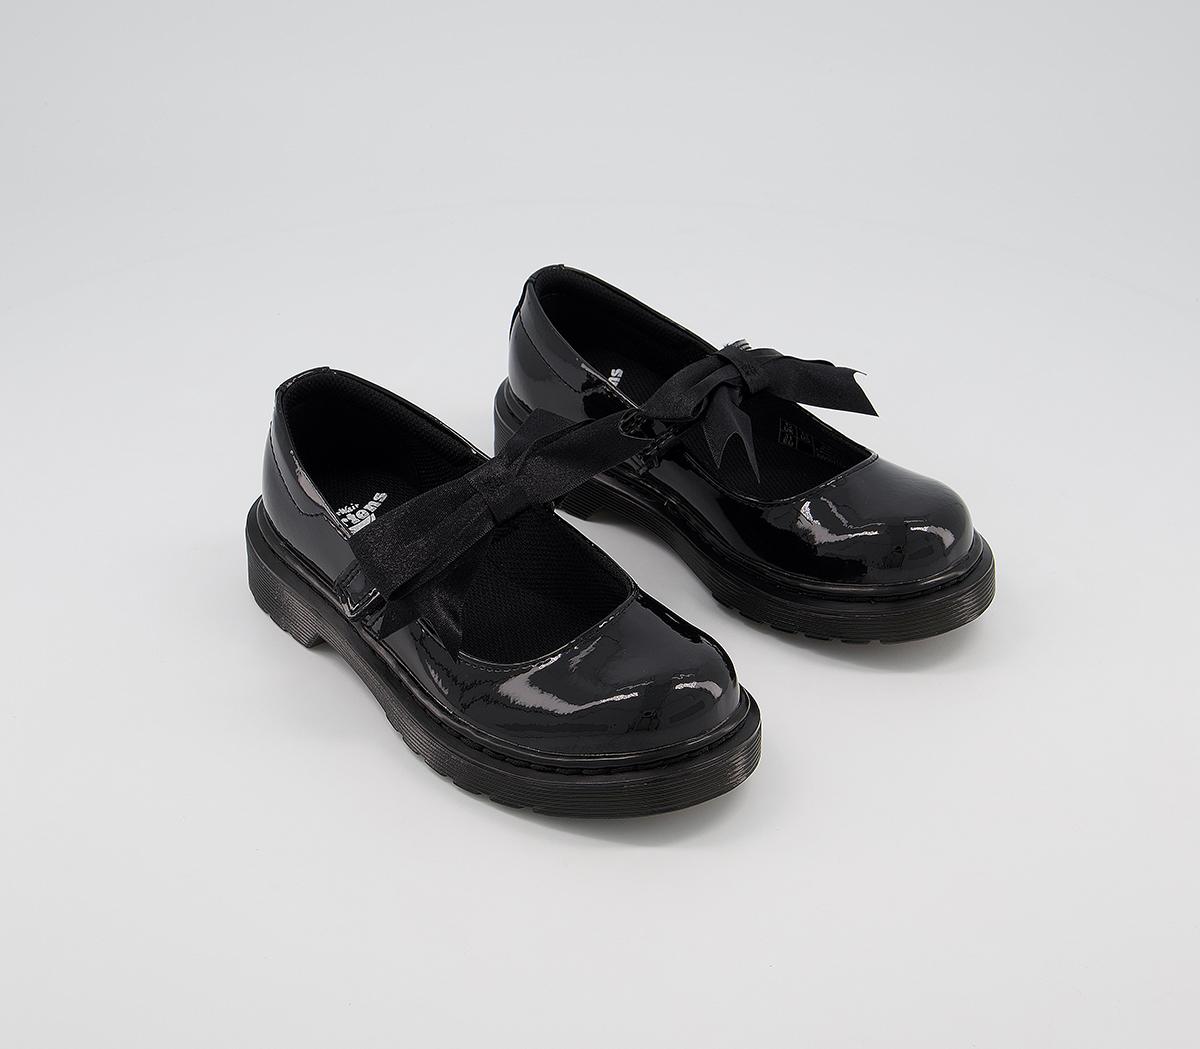 Dr. Martens Kids Maccy Ii Bow Mary Jane Jnr Black Patent Leather, 2